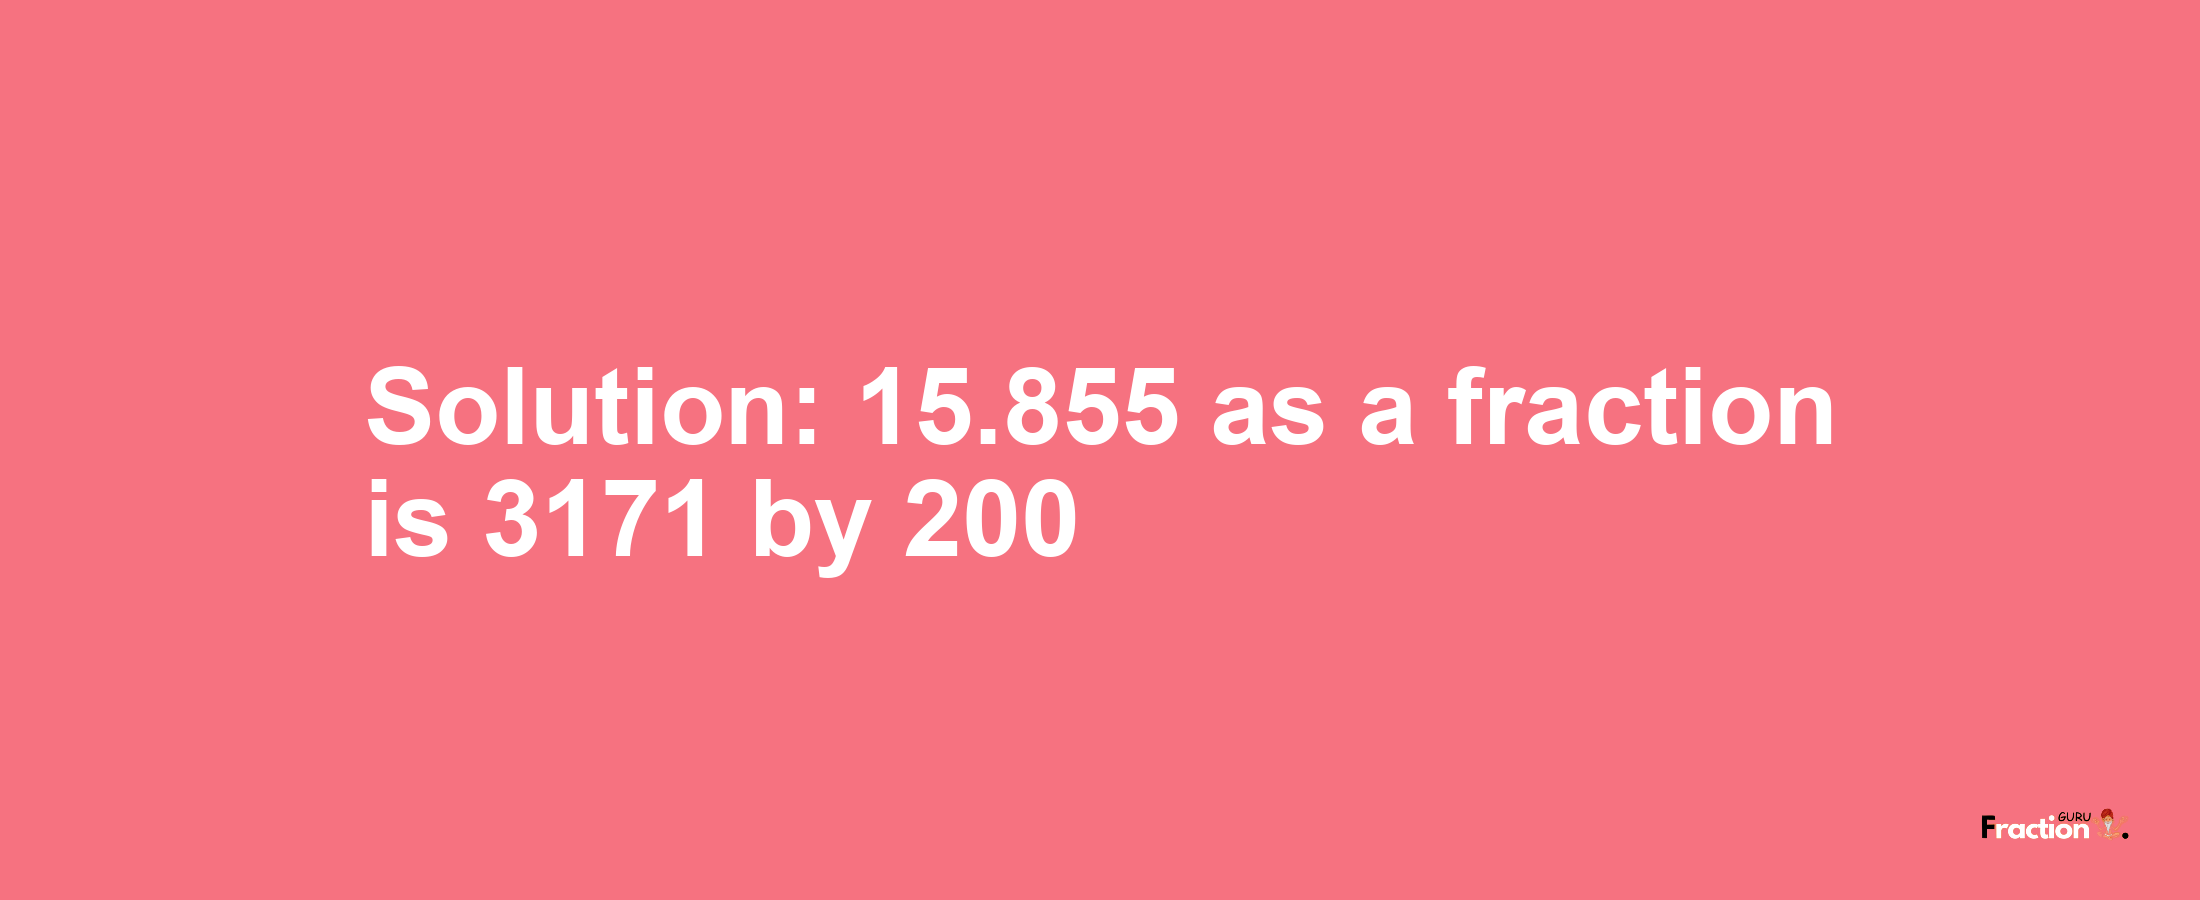 Solution:15.855 as a fraction is 3171/200